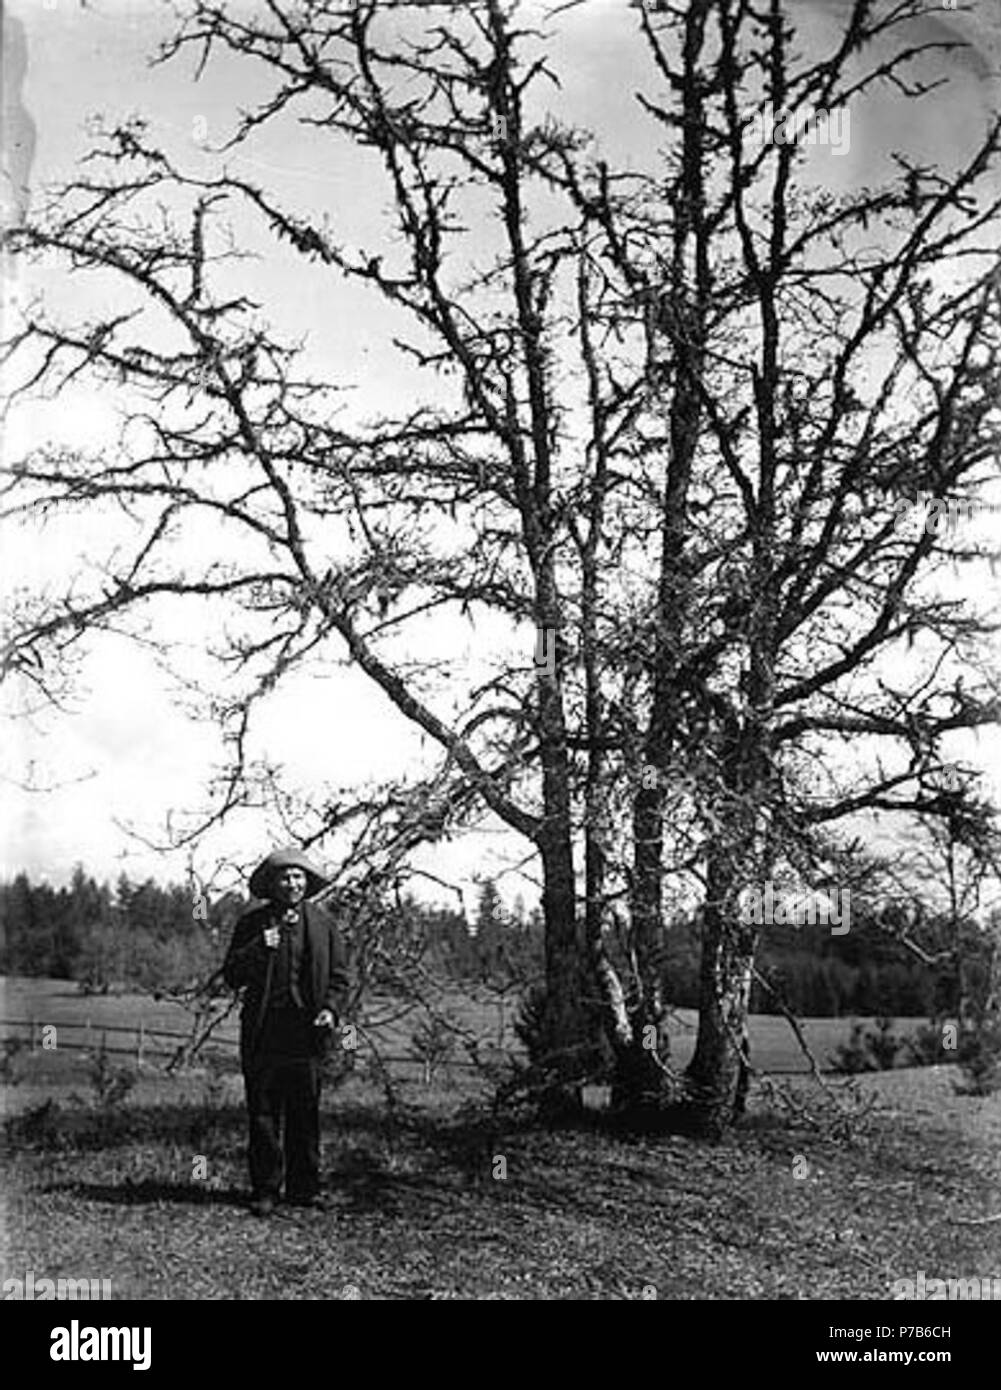 . English: Slugumus Koquilton, Muckleshoot Indian, standing next to oak trees on prairie near Sequalitchew Lake, Washington, April 1906. English: This is the spot where Wilkes celebrated July 4th in 1841. (Tacoma Daily Ledger, April 29, 1906, p.25) On sleeve of negative: Indian. Old man by old tree Subjects (LCSH): Koquilton, Slugumus; Muckleshoot Indians--Washington (State)--Sequalitchew Lake  . 1906 76 Slugumus Koquilton, Muckleshoot Indian, standing next to oak trees on prairie near Sequalitchew Lake, Washington, April 1906 (BAR 220) Stock Photo